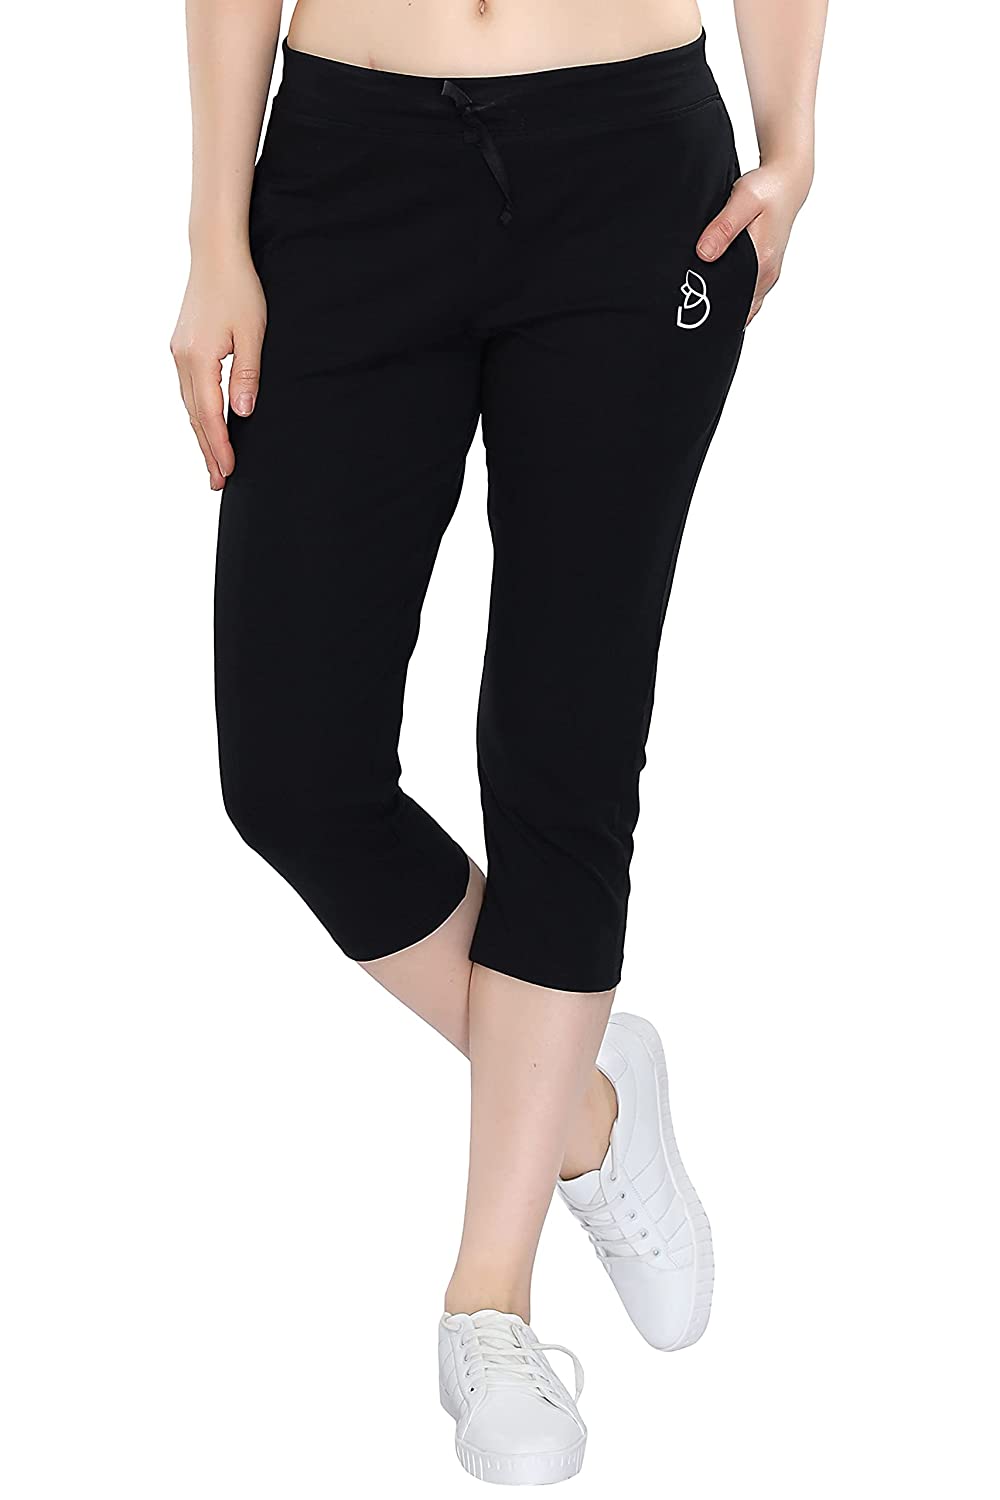 Fitness Women's Cropped Capri Leggings ALOHA E-store repinpeace.com -  Polish manufacturer of sportswear for fitness, Crossfit, gym, running.  Quick delivery and easy return and exchange